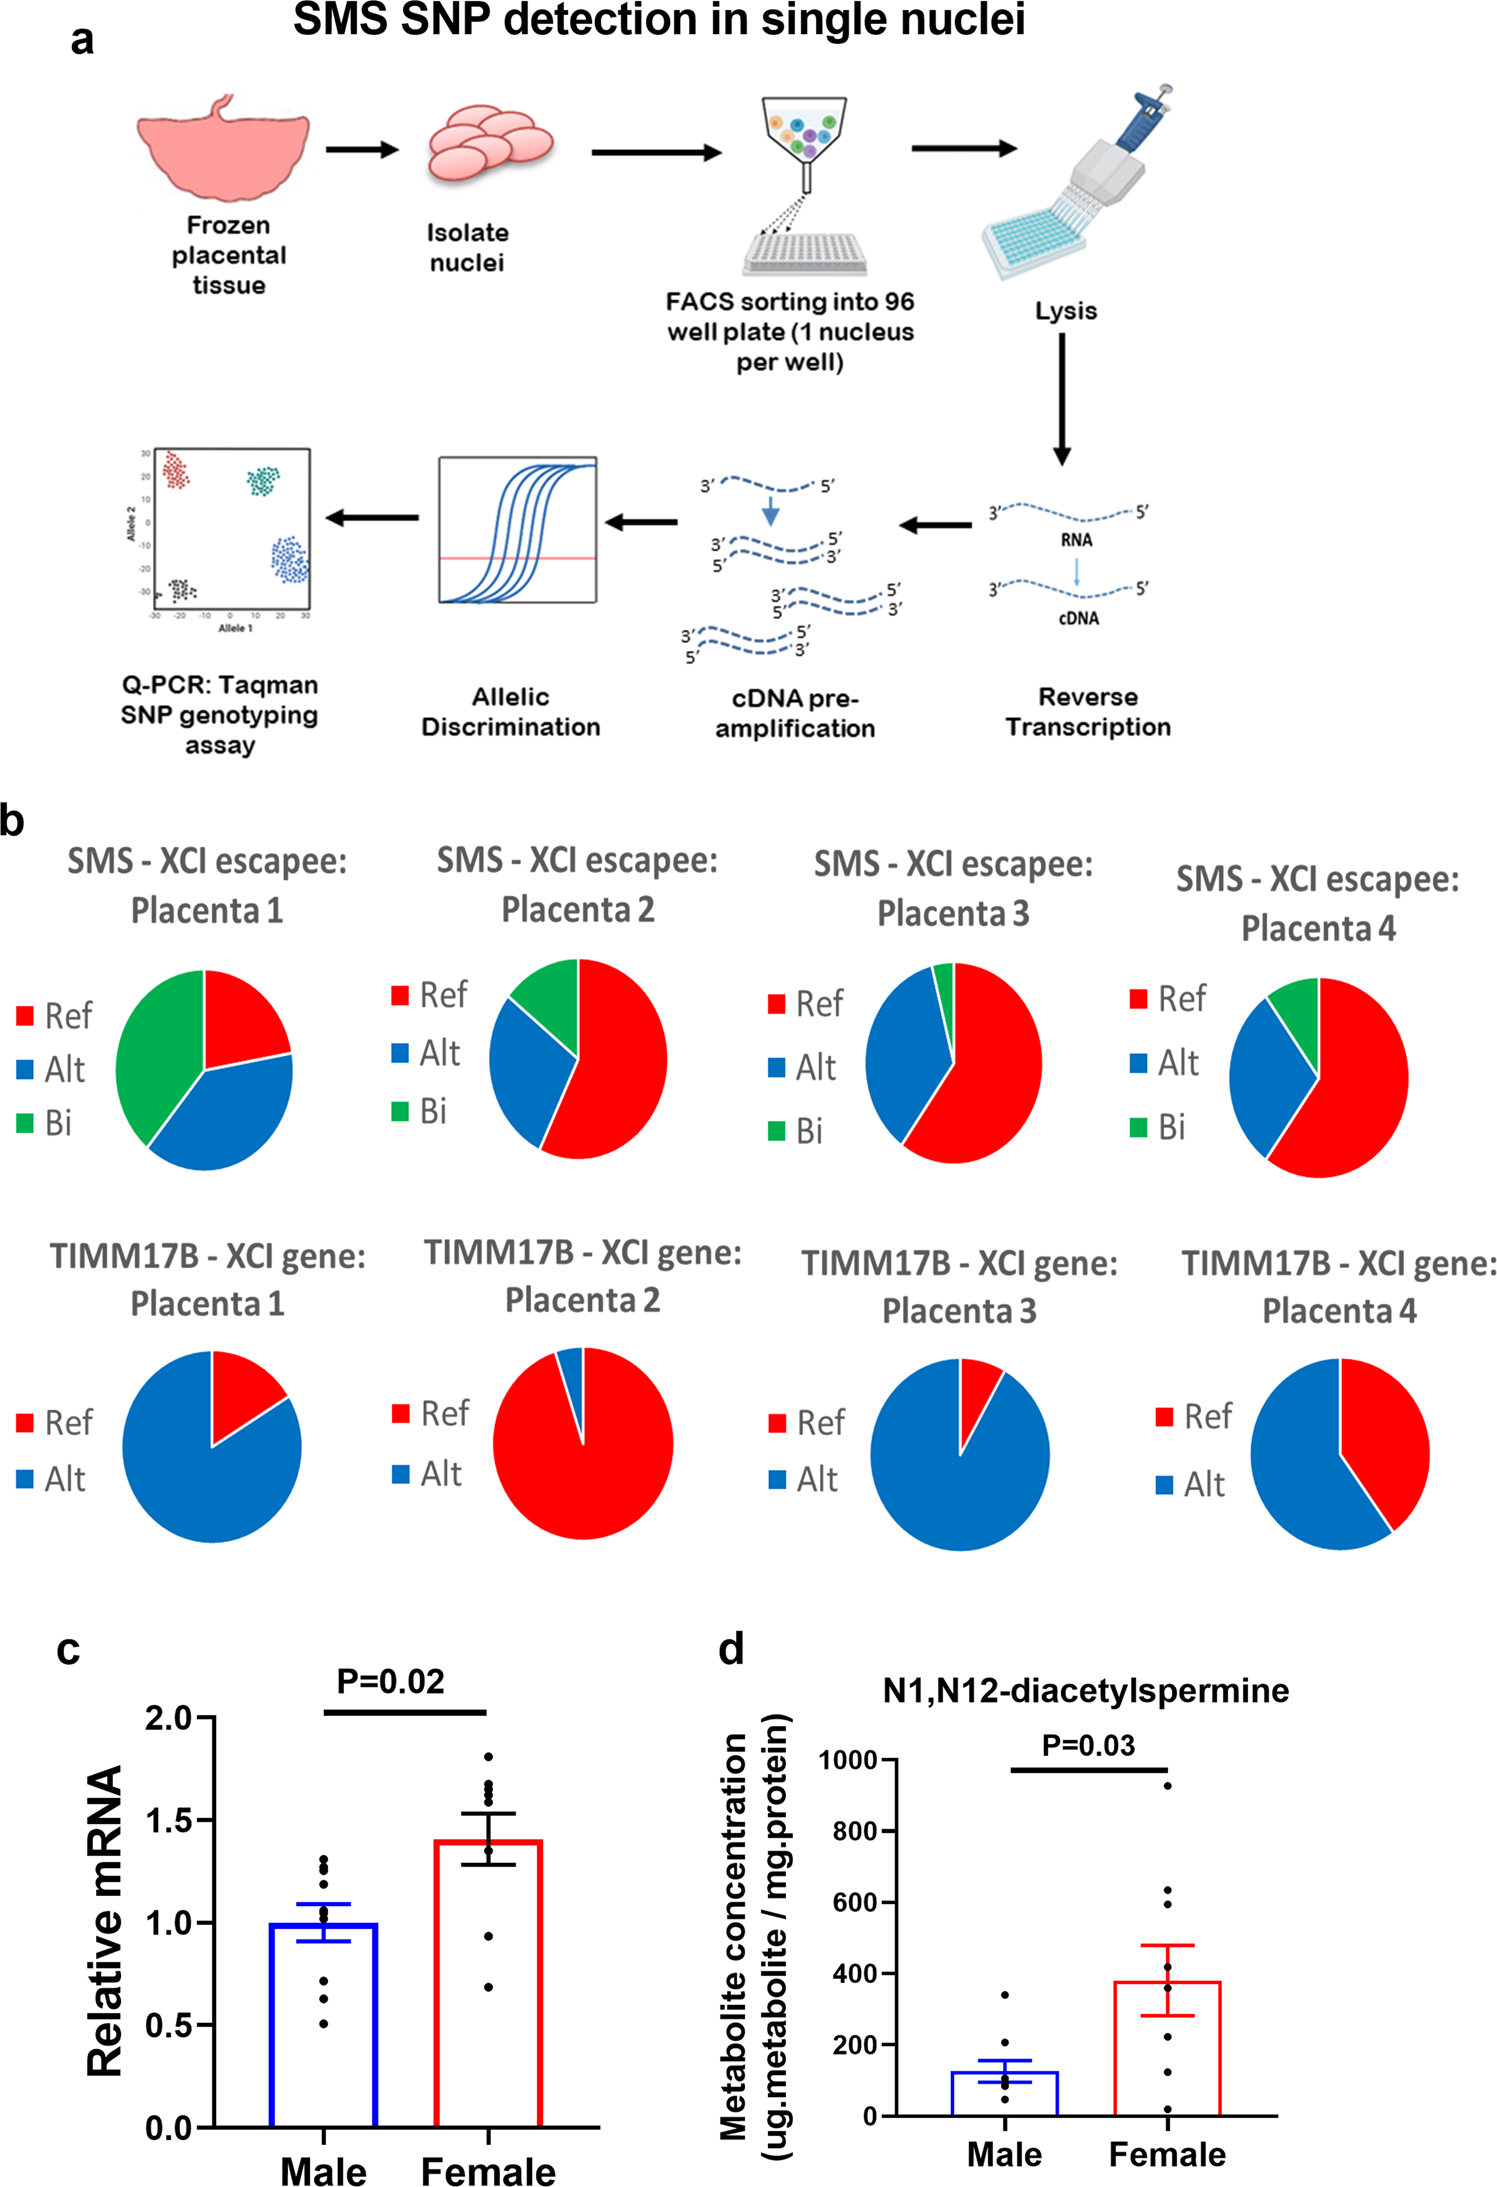 Placental sex-dependent spermine synthesis regulates trophoblast gene  expression through acetyl-coA metabolism and histone acetylation |  Communications Biology